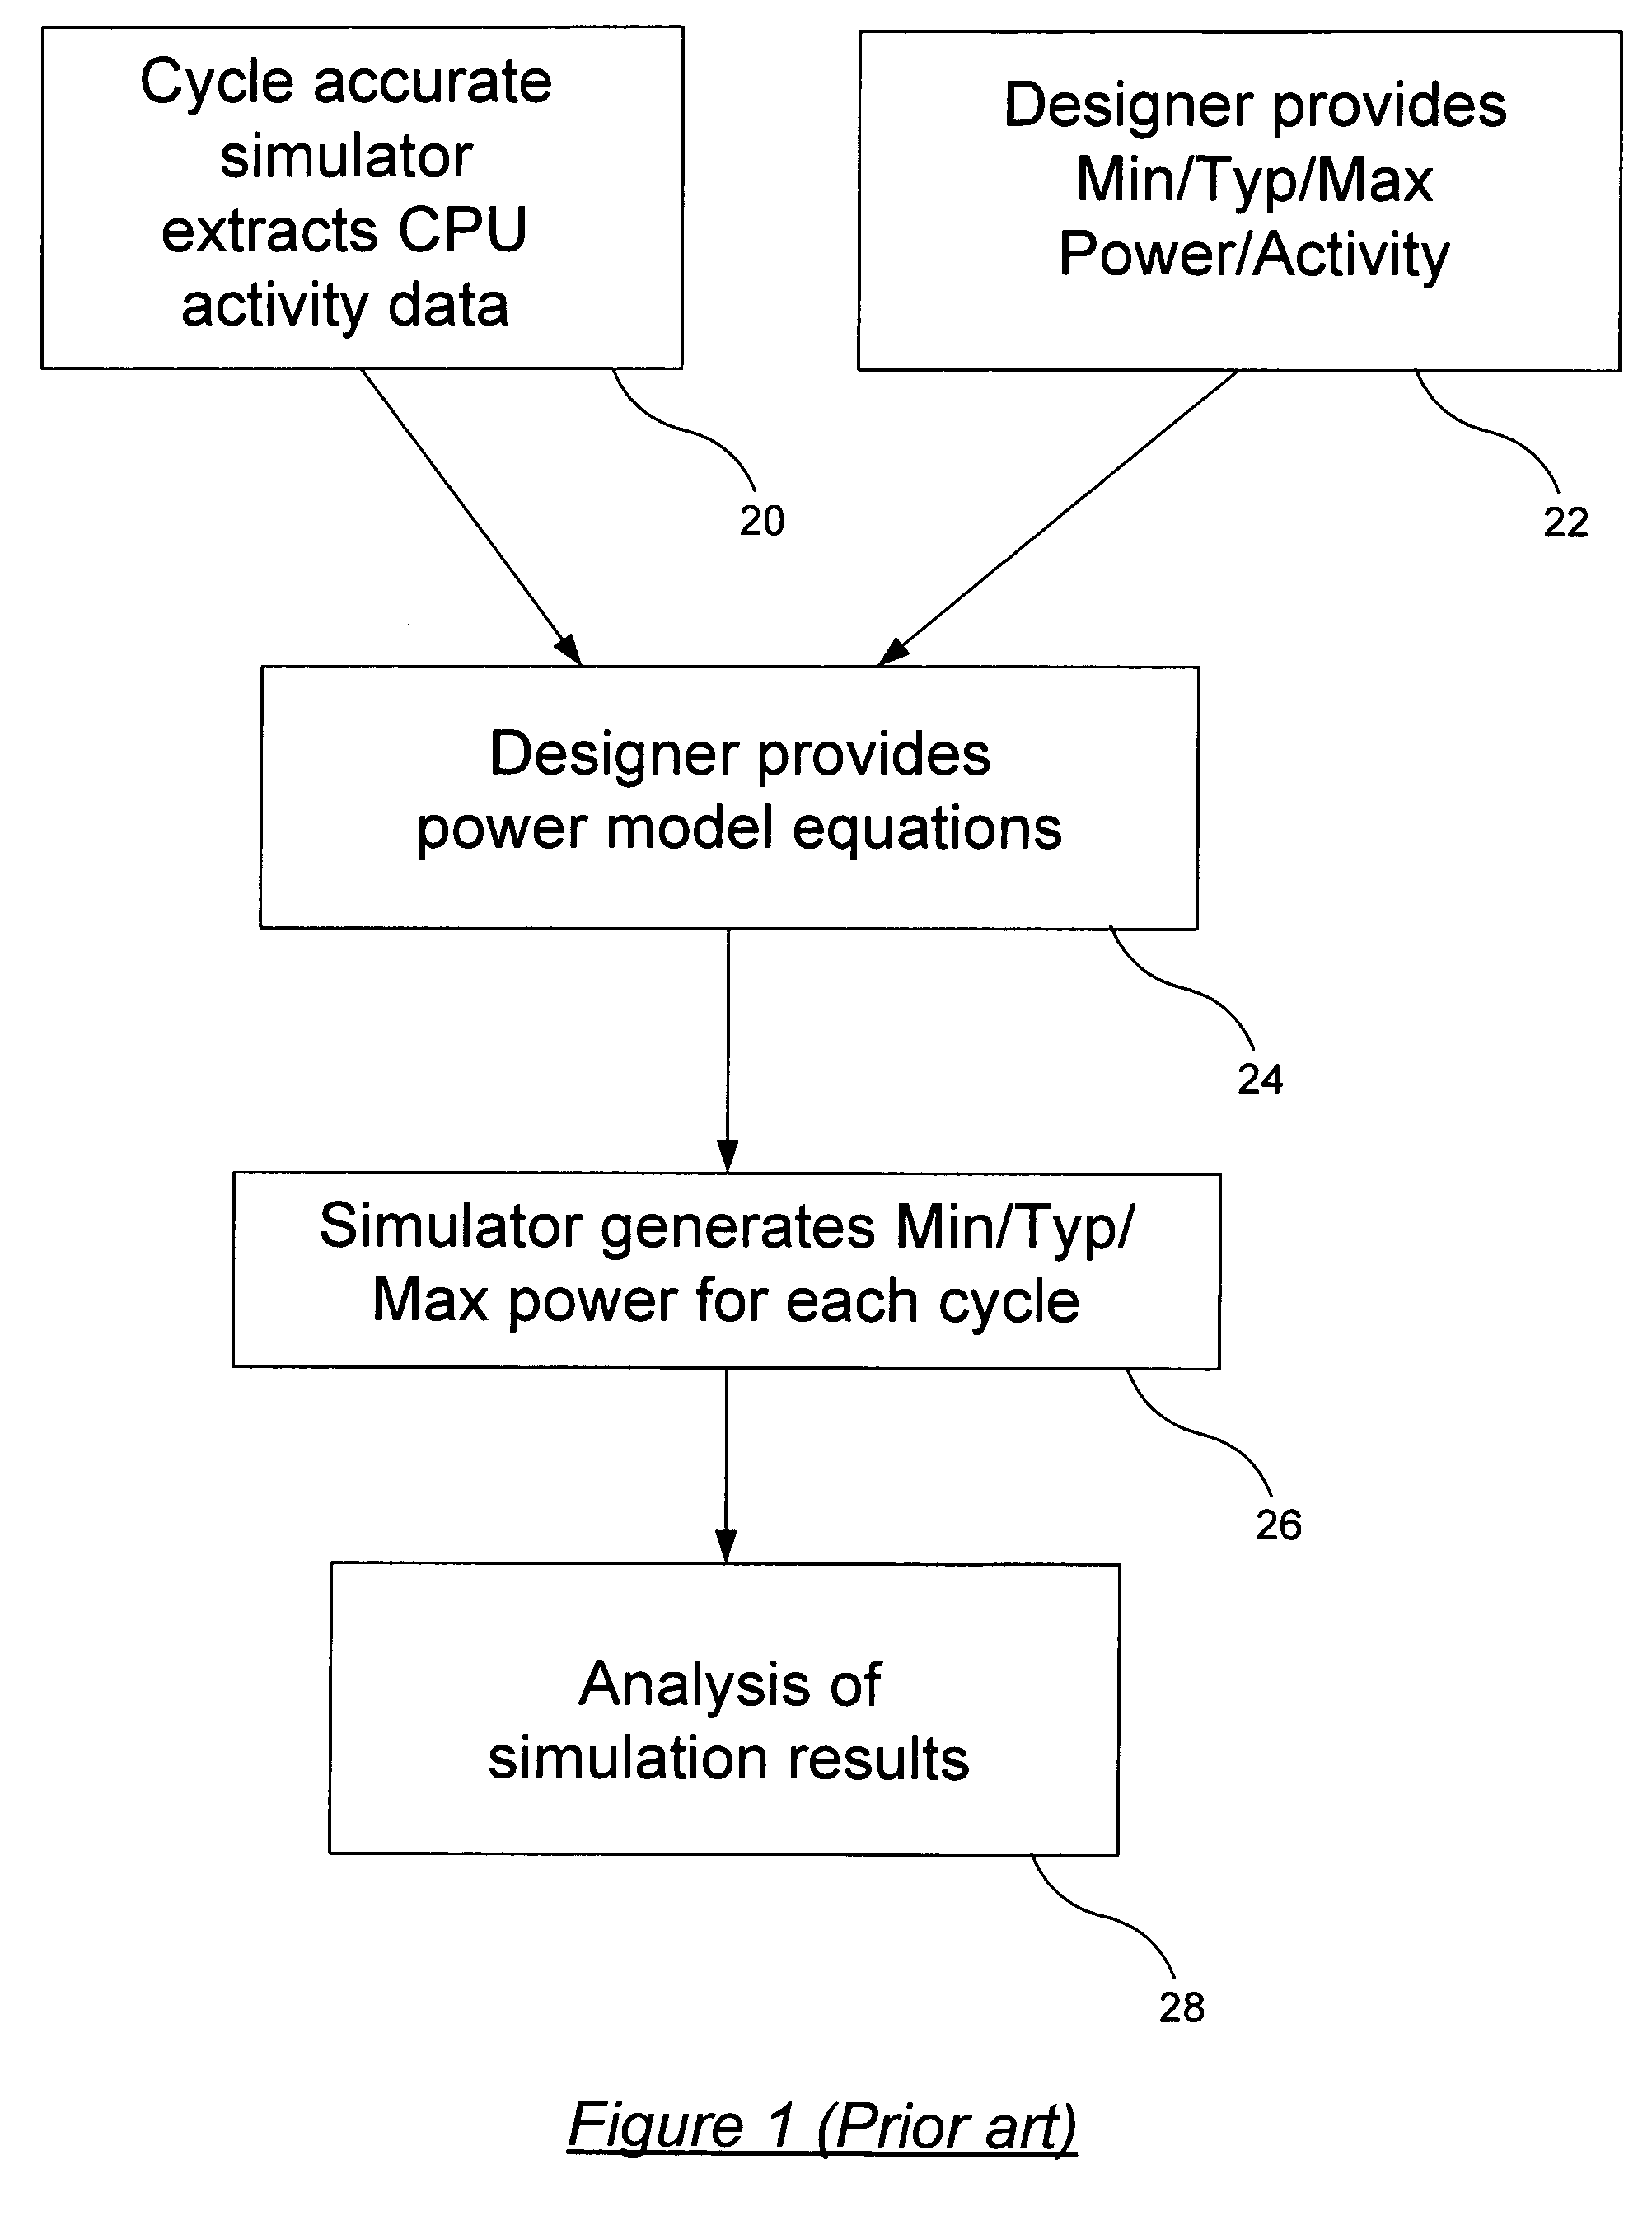 Data analysis techniques for dynamic power simulation of a CPU